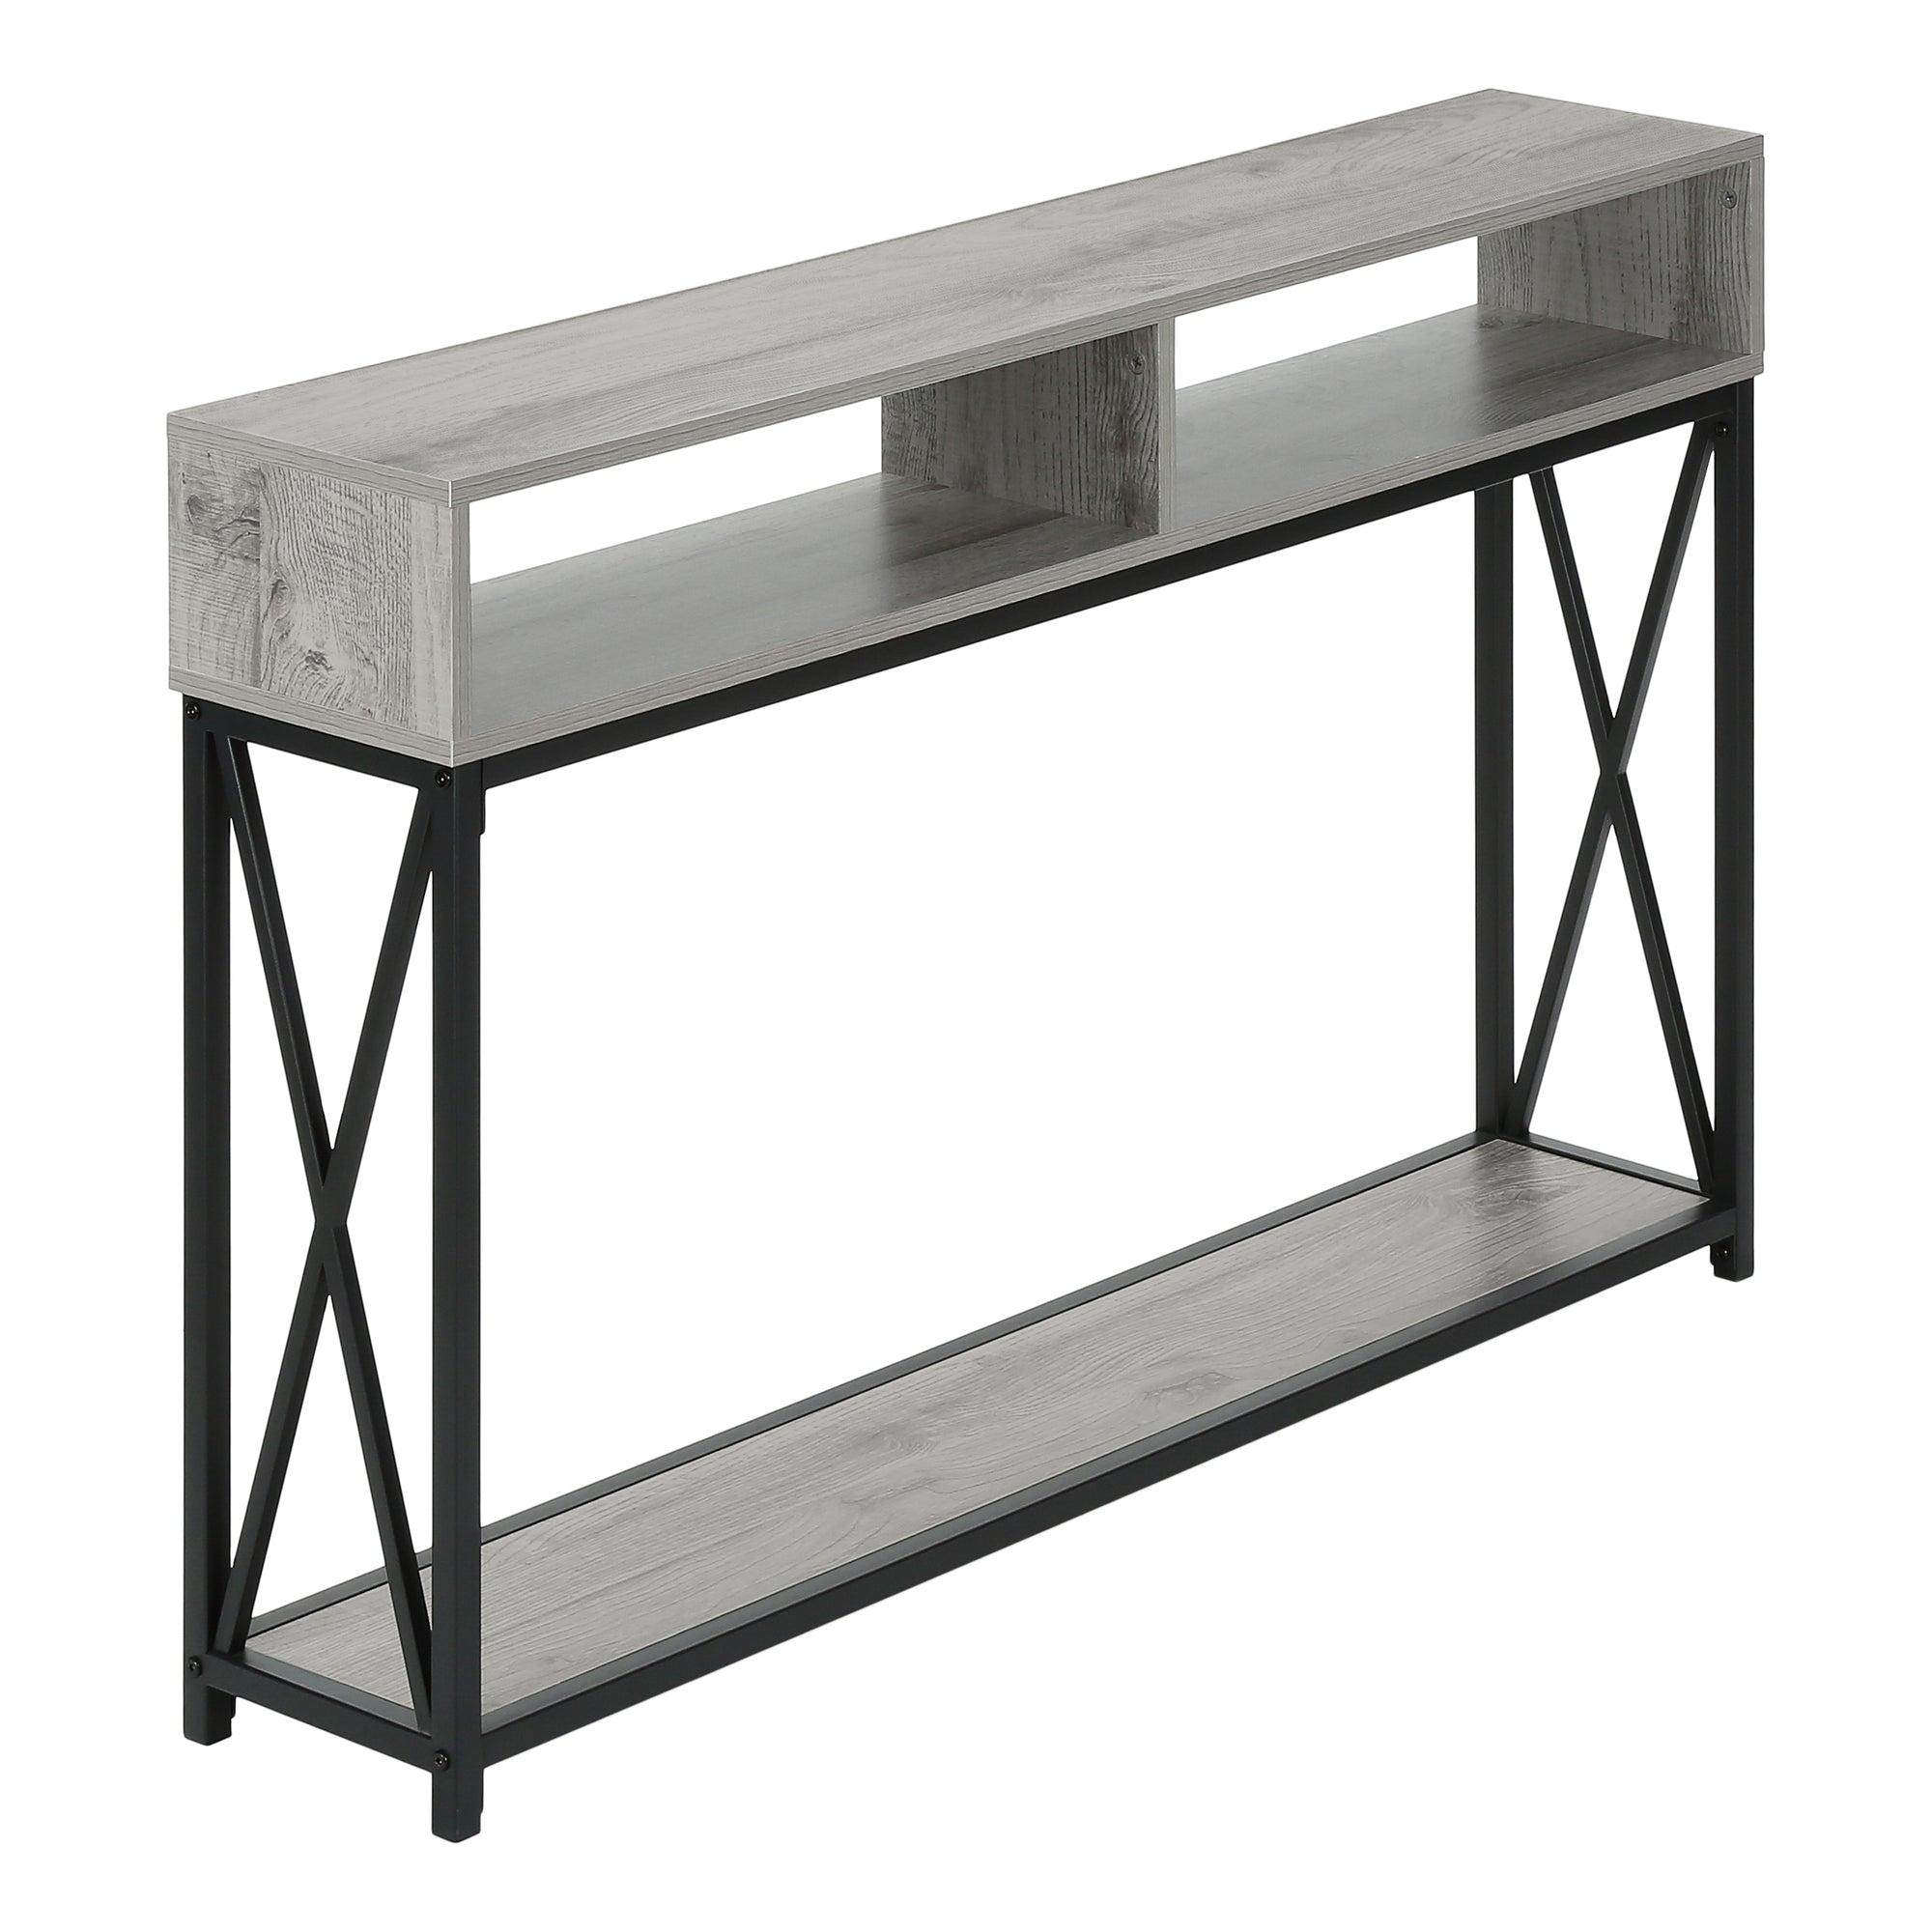 Accent Table - 48L / Grey / Black Metal Hall Console